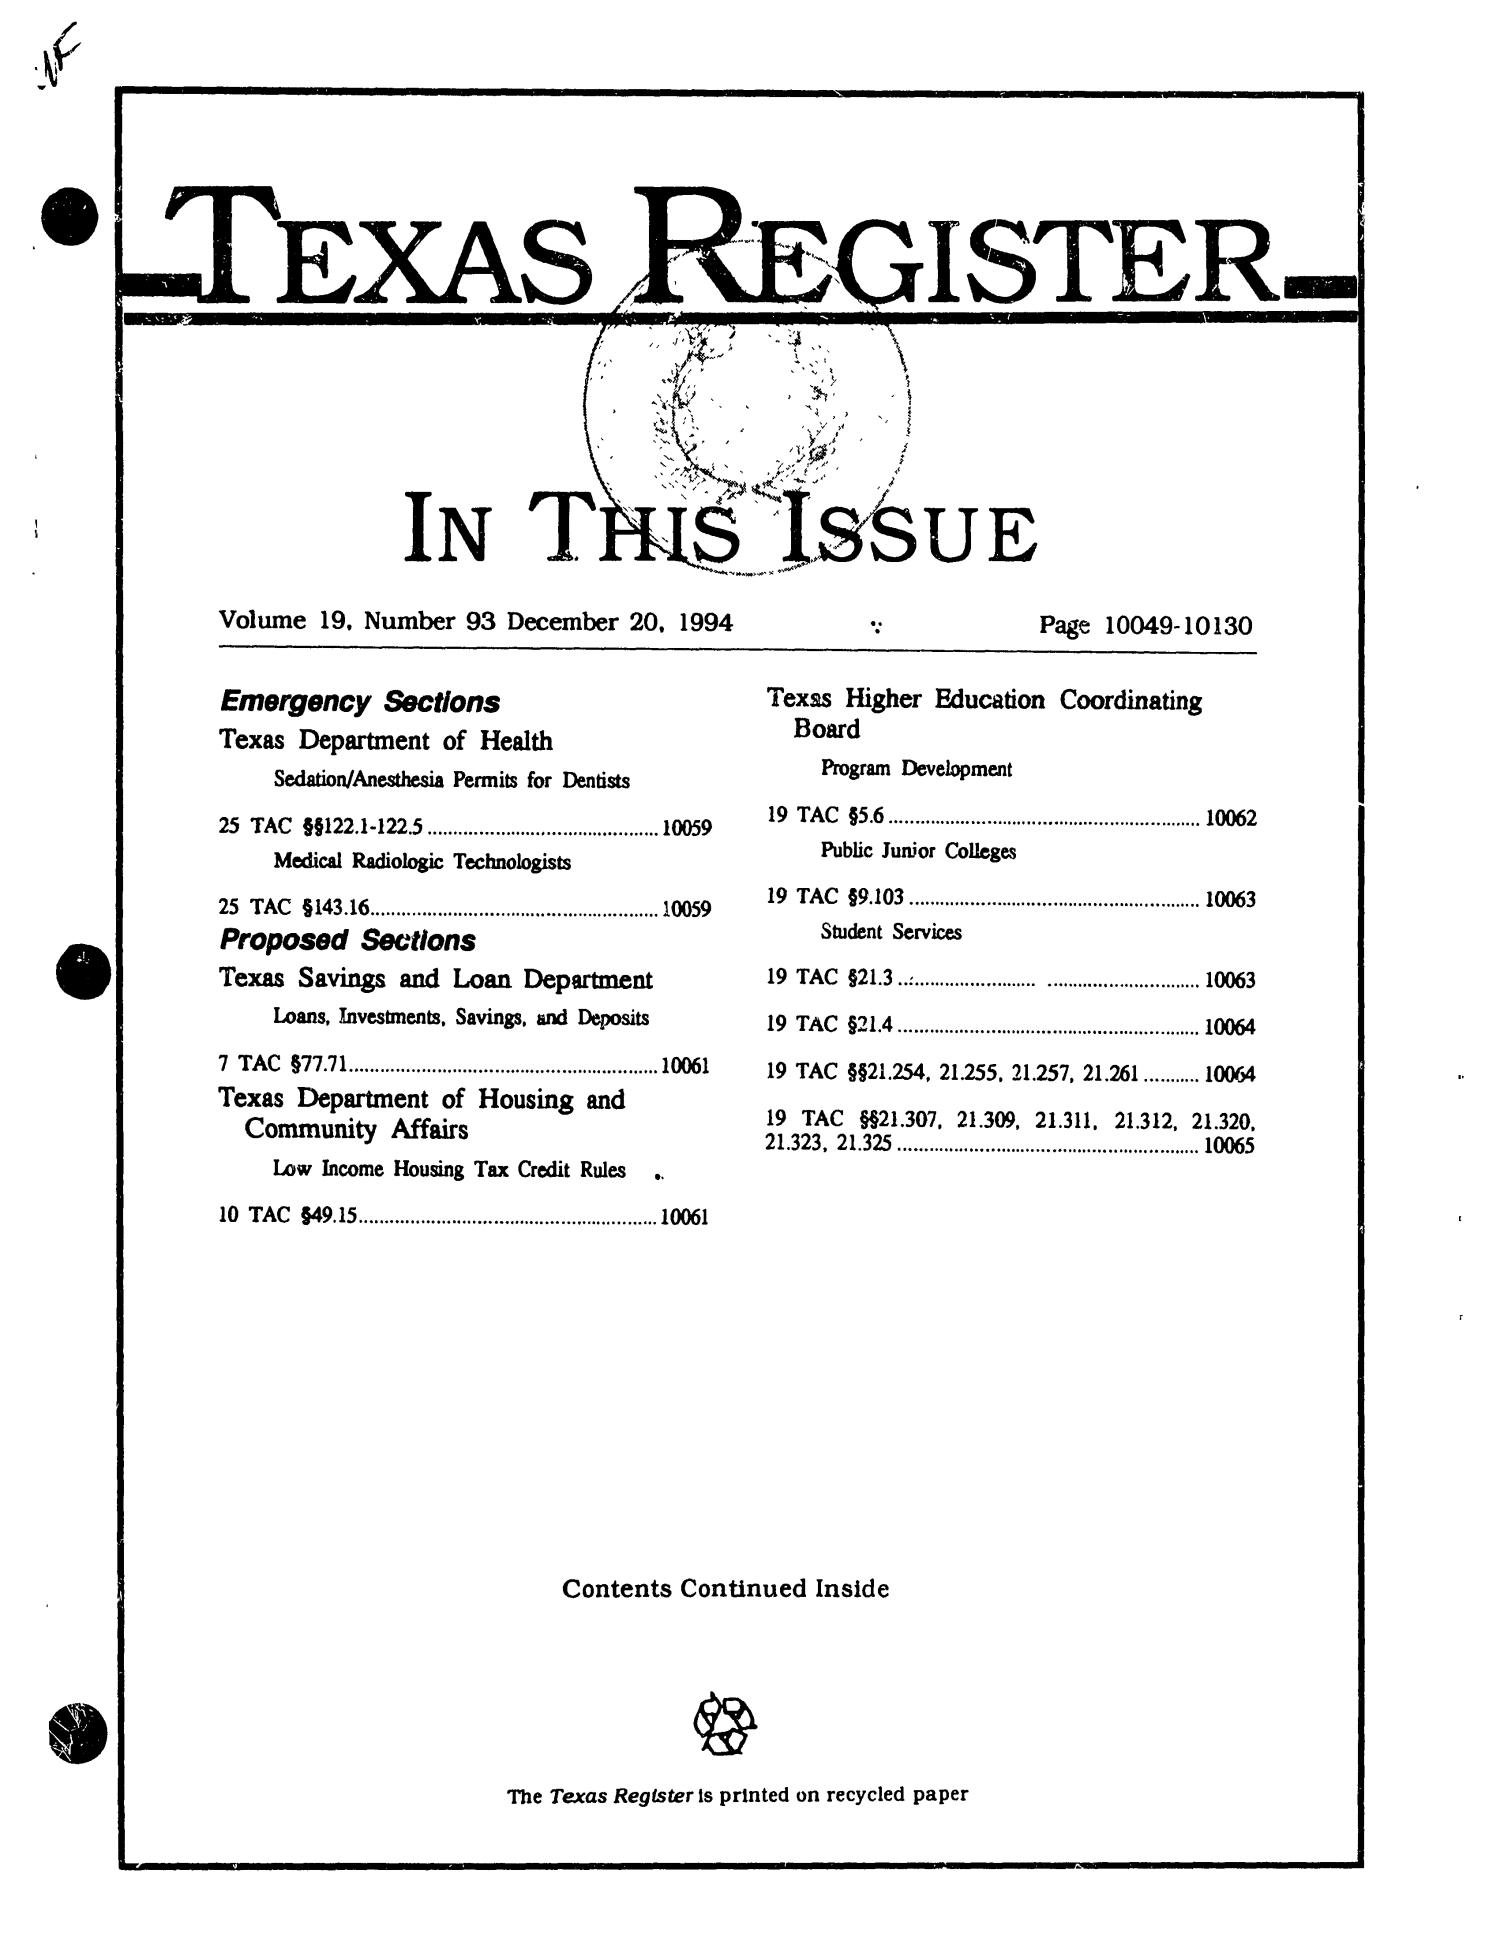 Texas Register, Volume 19, Number 93, Pages 10049-10130, December 20, 1994
                                                
                                                    Title Page
                                                